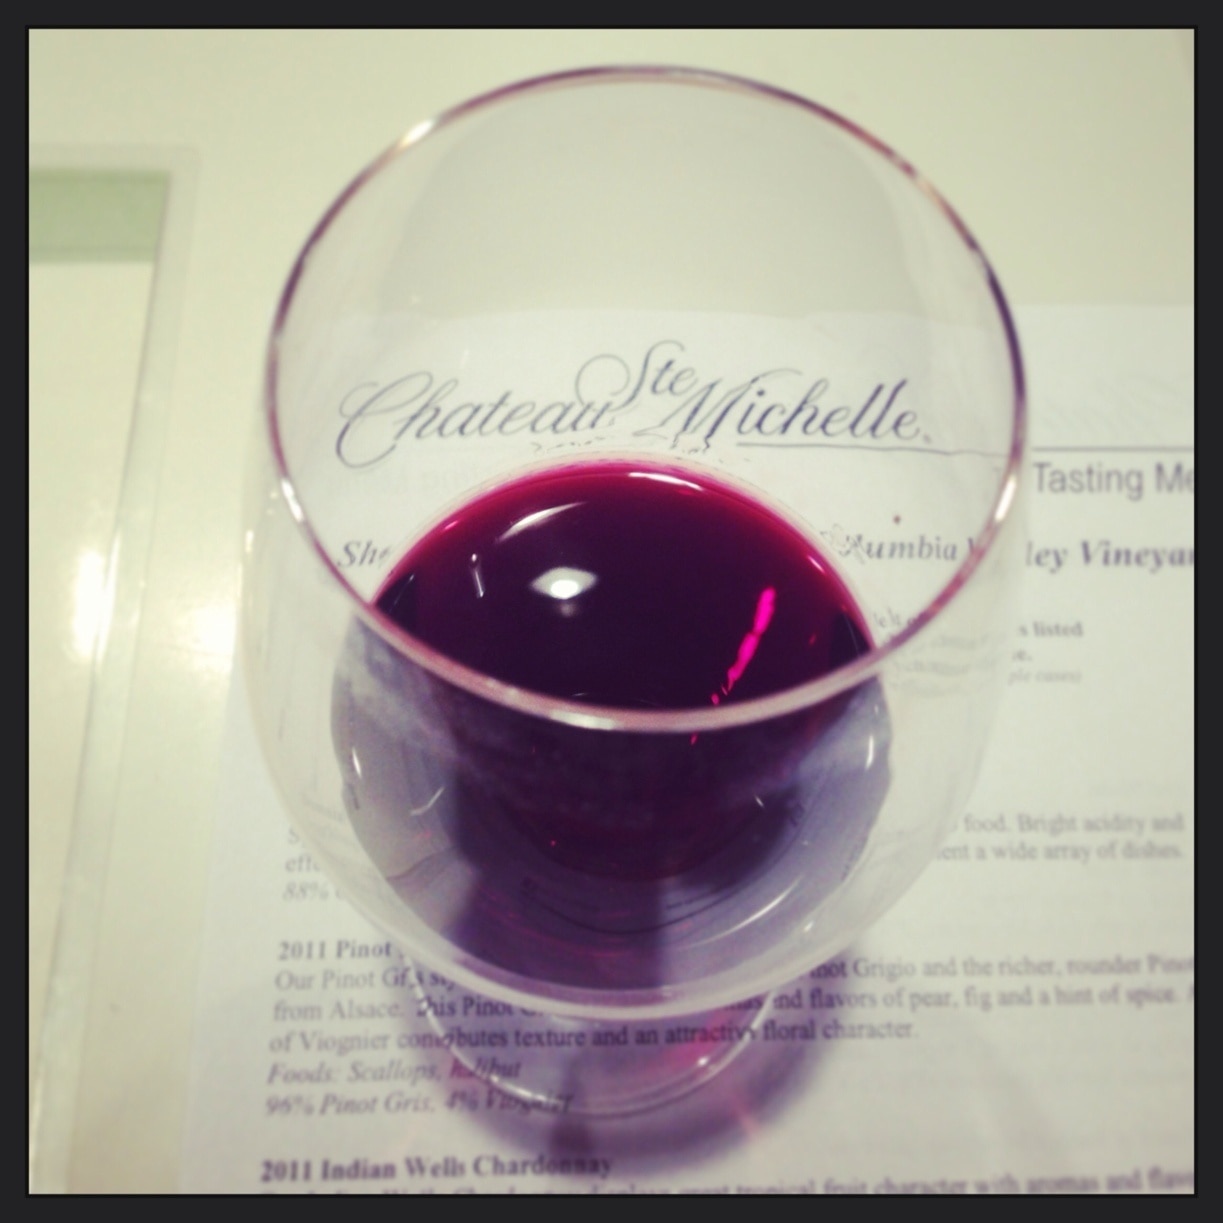 Wine tasting at the lovely Chateau Ste Michelle is a great day out and at only $10 for 4 tastings you can't beat it! 